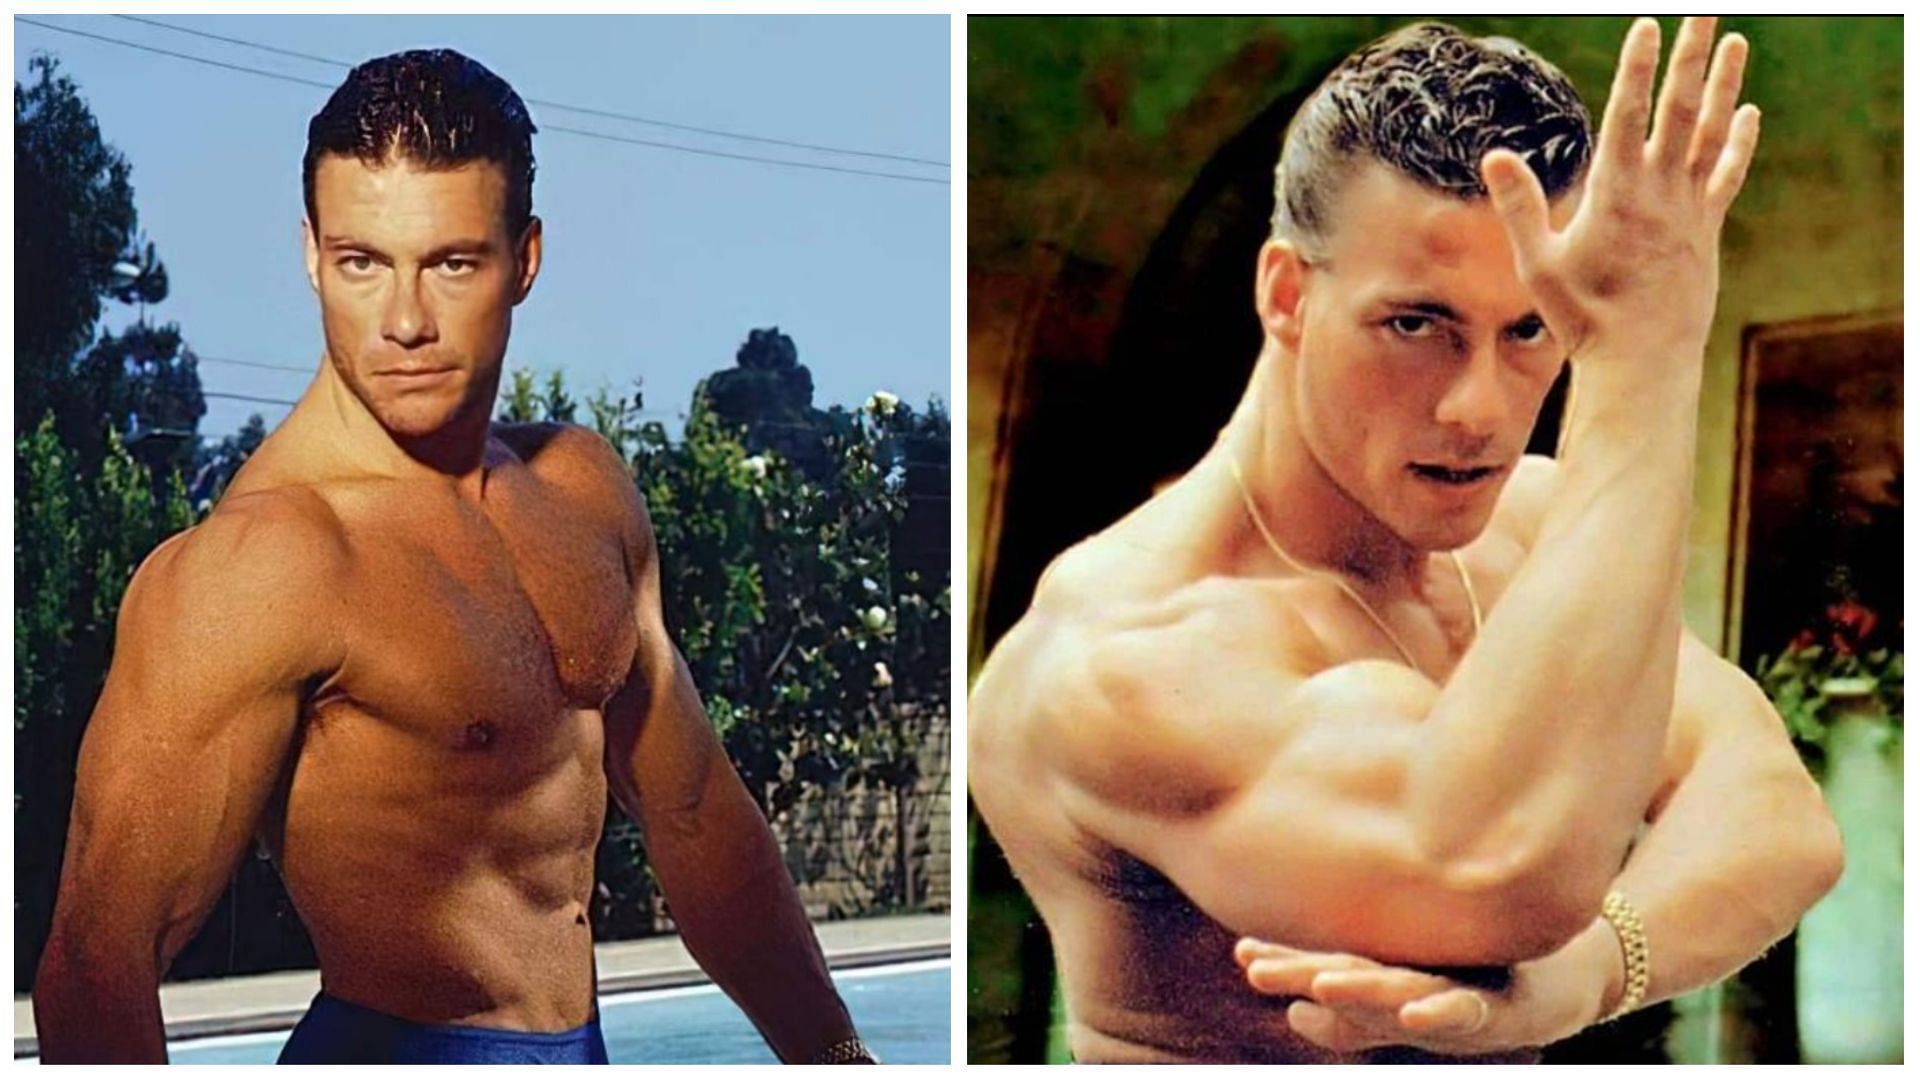 Jean-Claude Van Damme works hard to maintain his physique through workout and diet routine. (Image via Instagram)